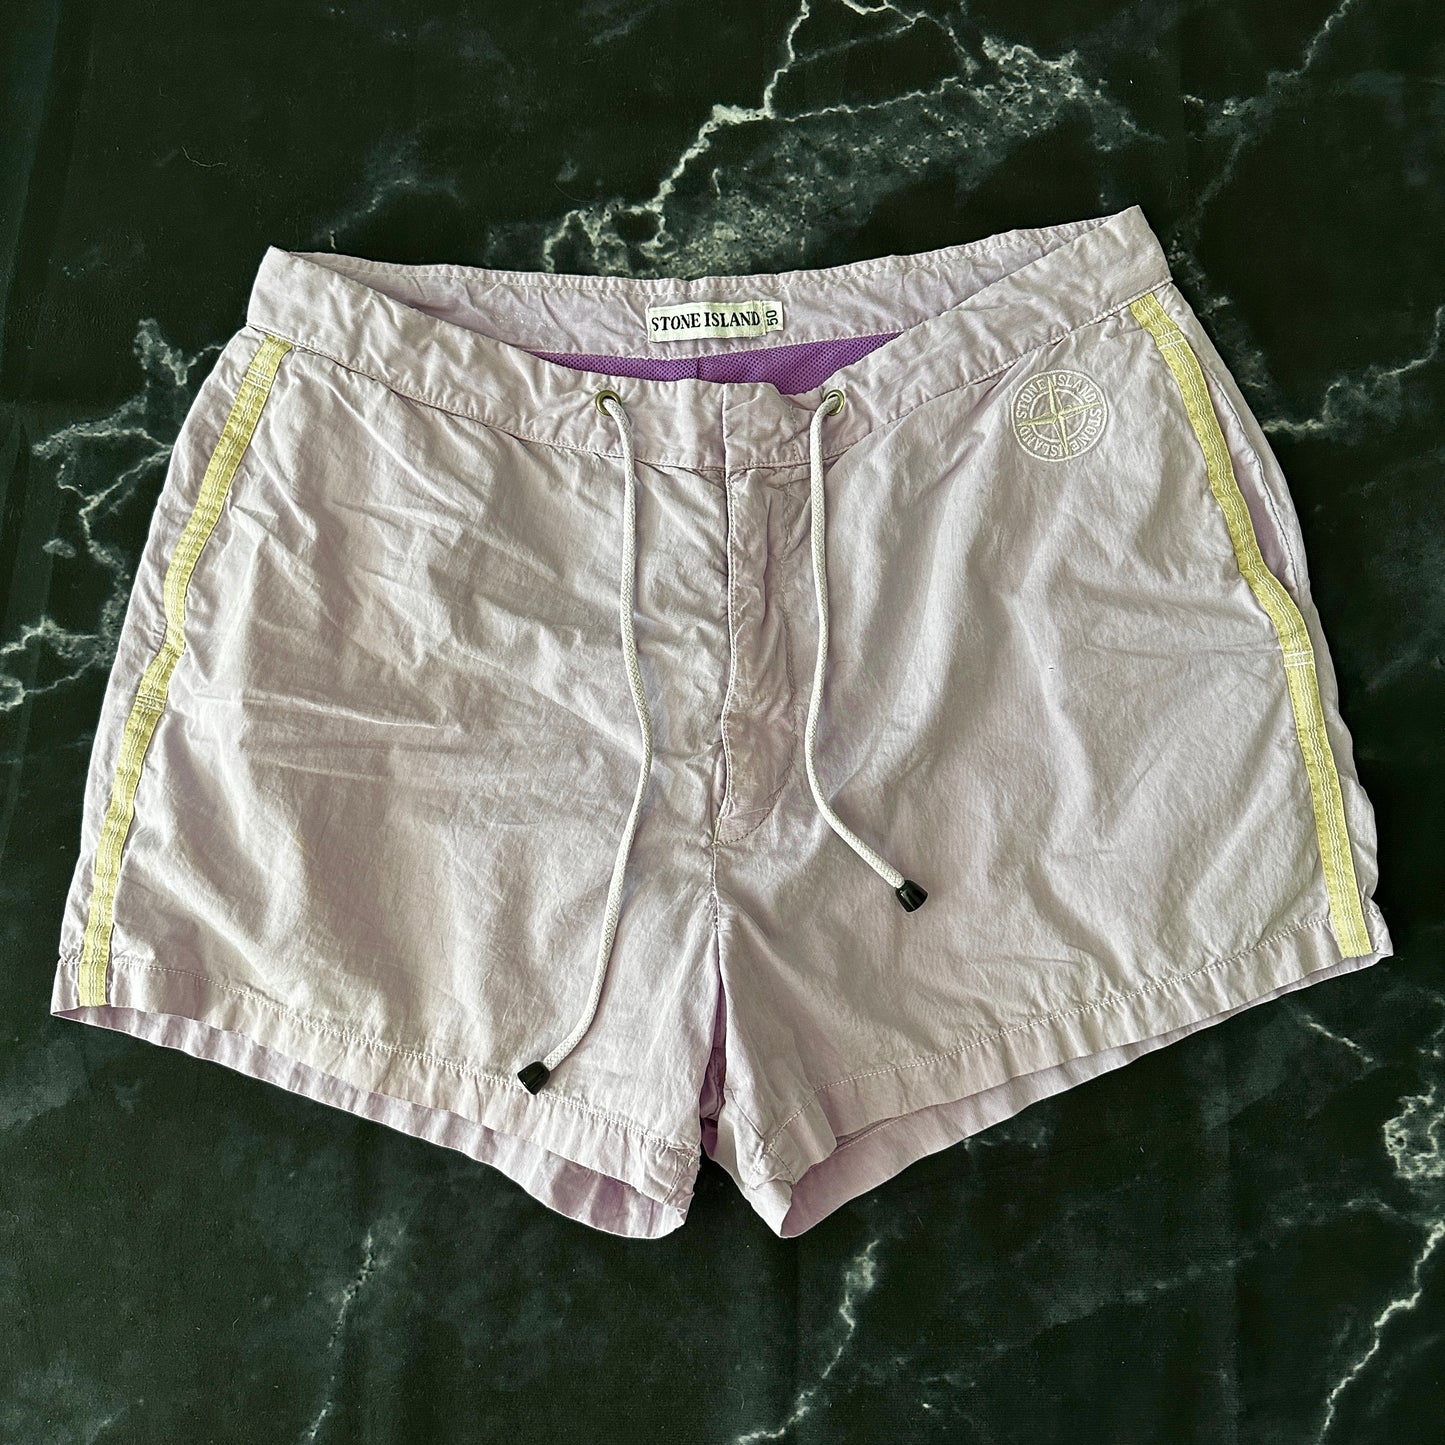 Stone Island Vintage 80s Swim Shorts - 50 / M - Made in Italy